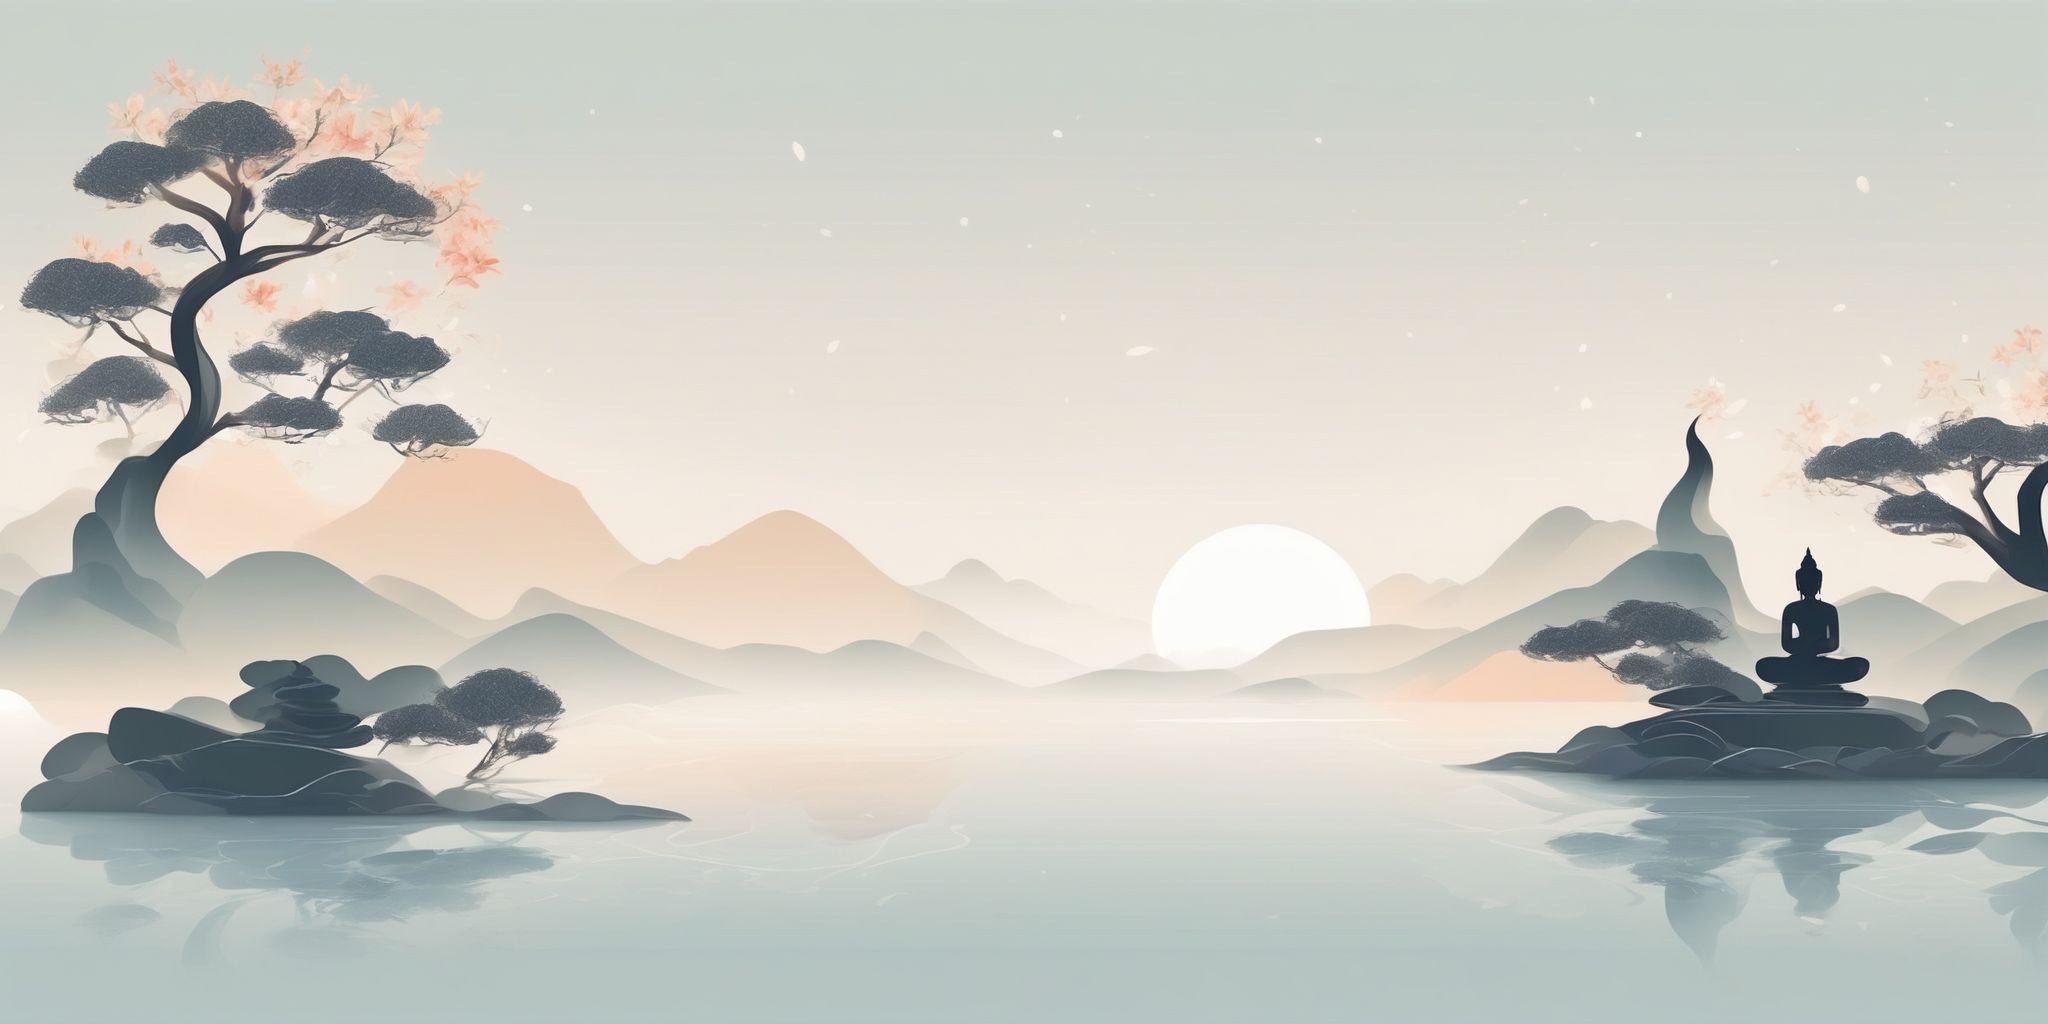 Zen in illustration style with gradients and white background